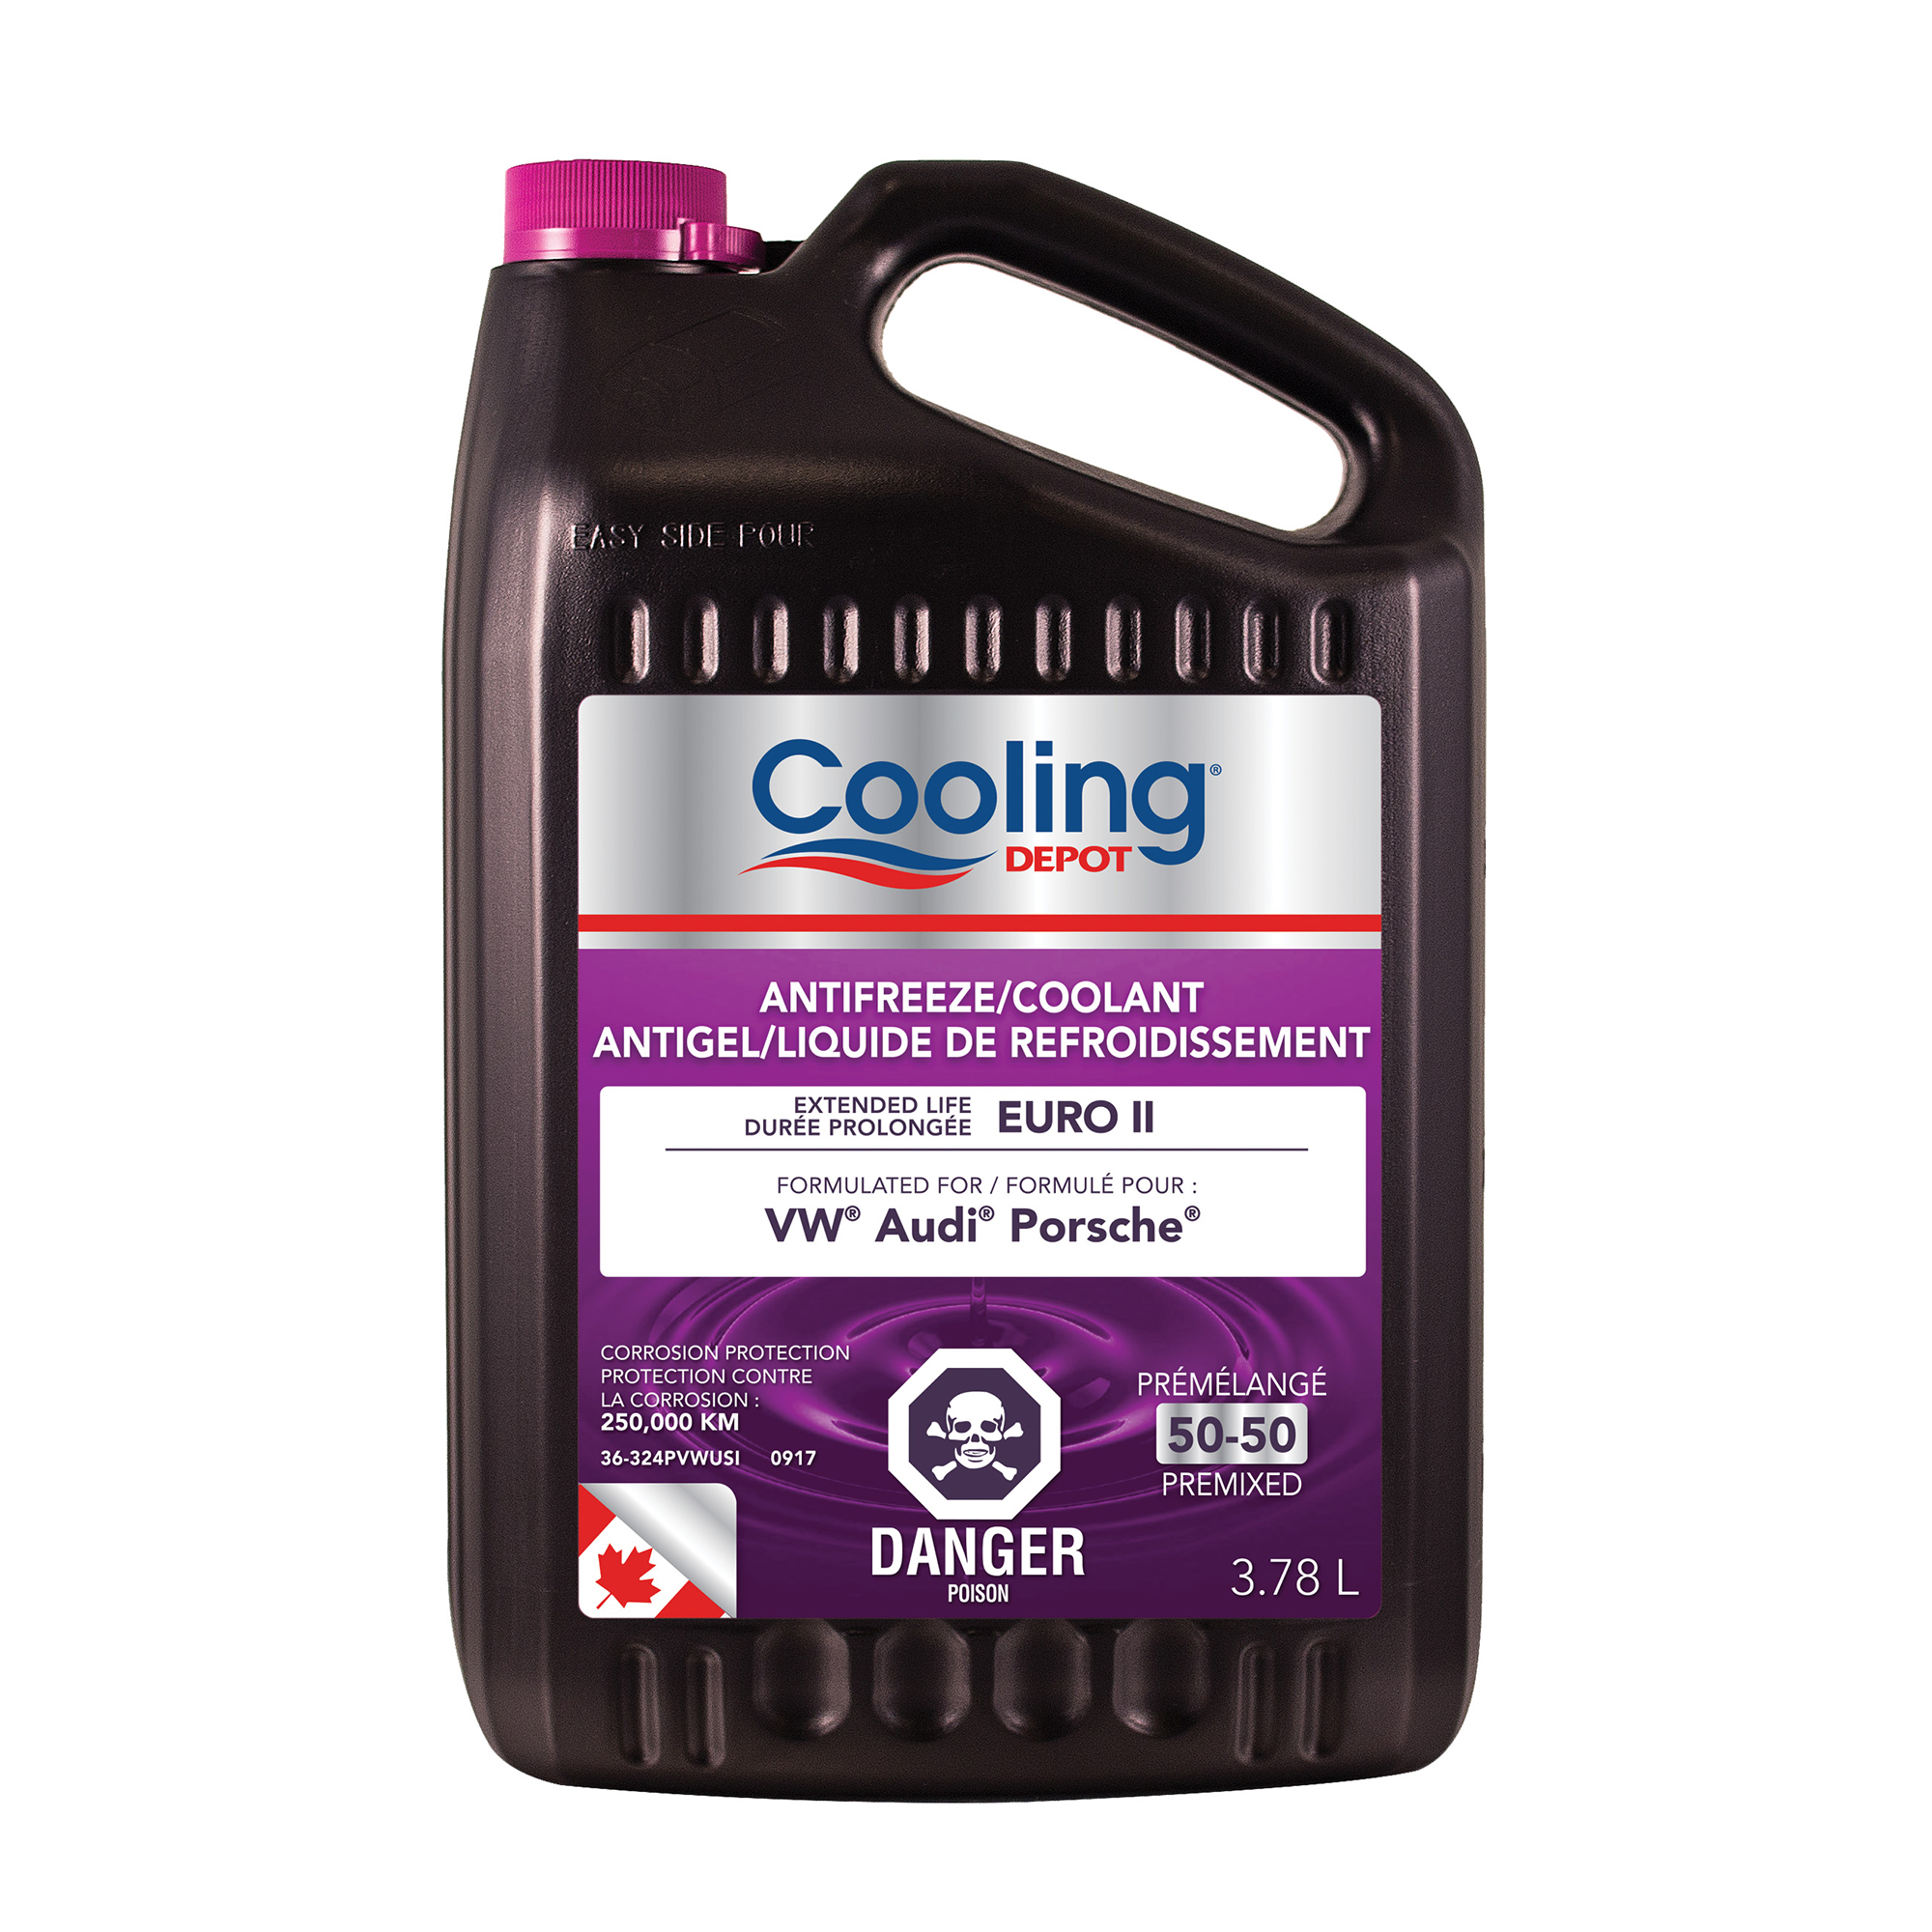 Cooling Depot - Ready-to-Use Extended Life Antifreeze/Coolant 